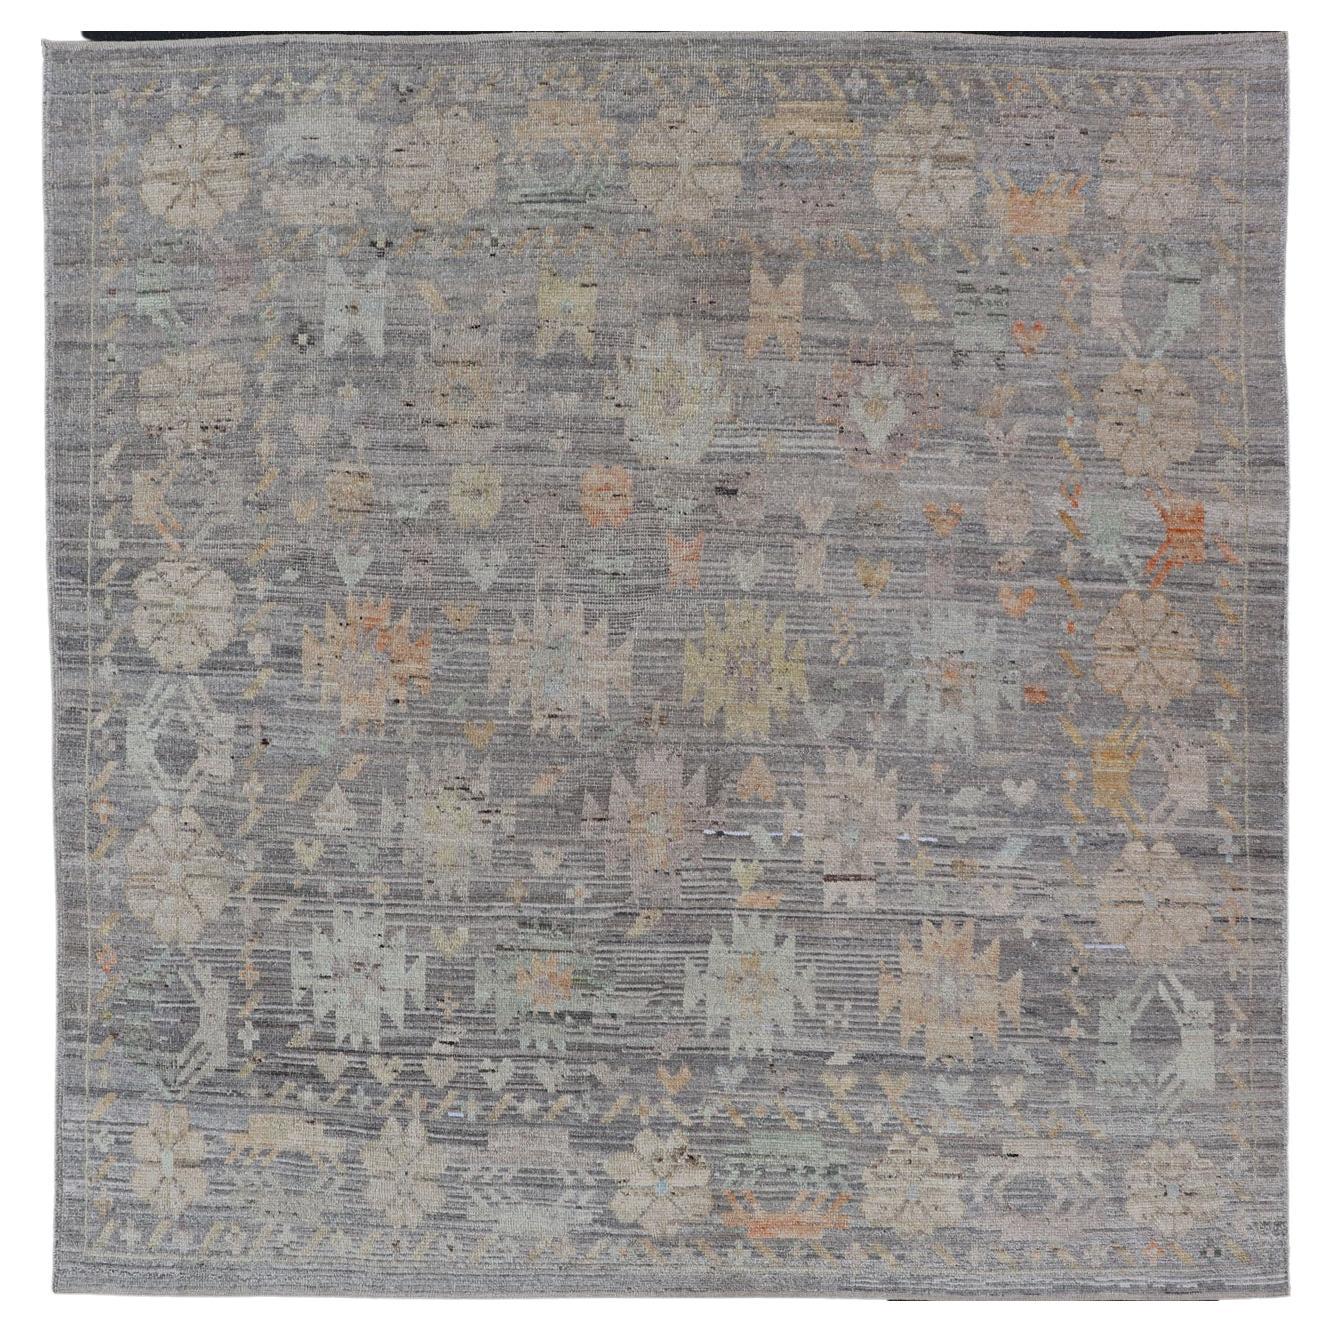 Modern Afghan Tribal Motif Designed Rug in Muted Tones and a Gray Background